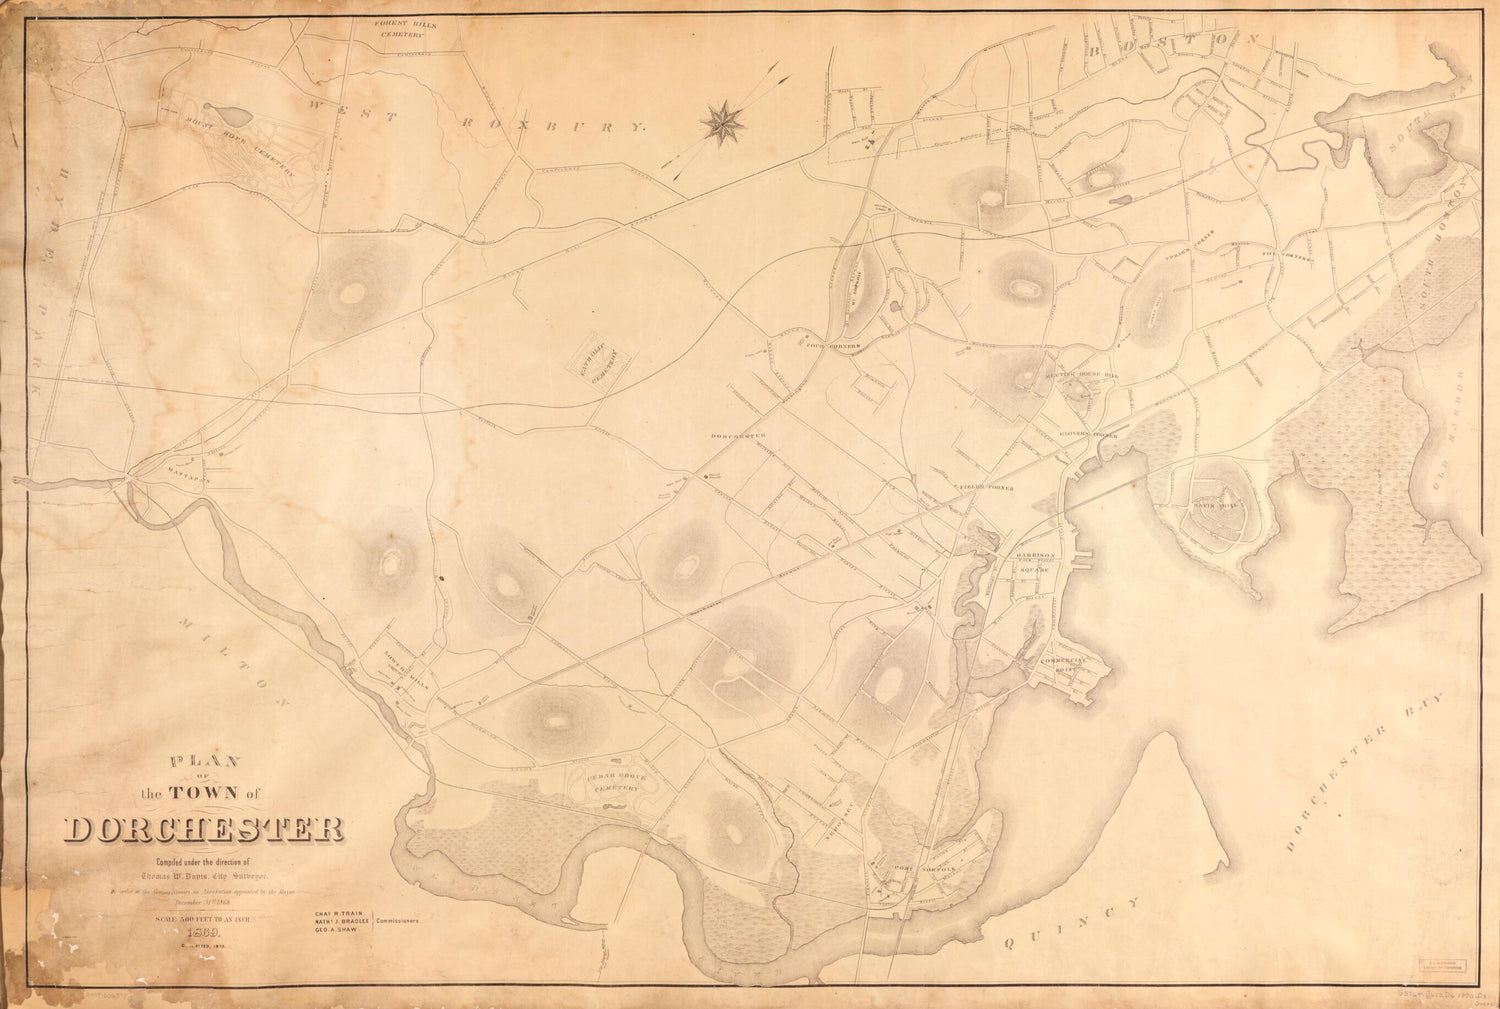 This old map of Plan of the Town of Dorchester from 1870 was created by Thomas W. Davis, A. (Augustus) Meisel in 1870